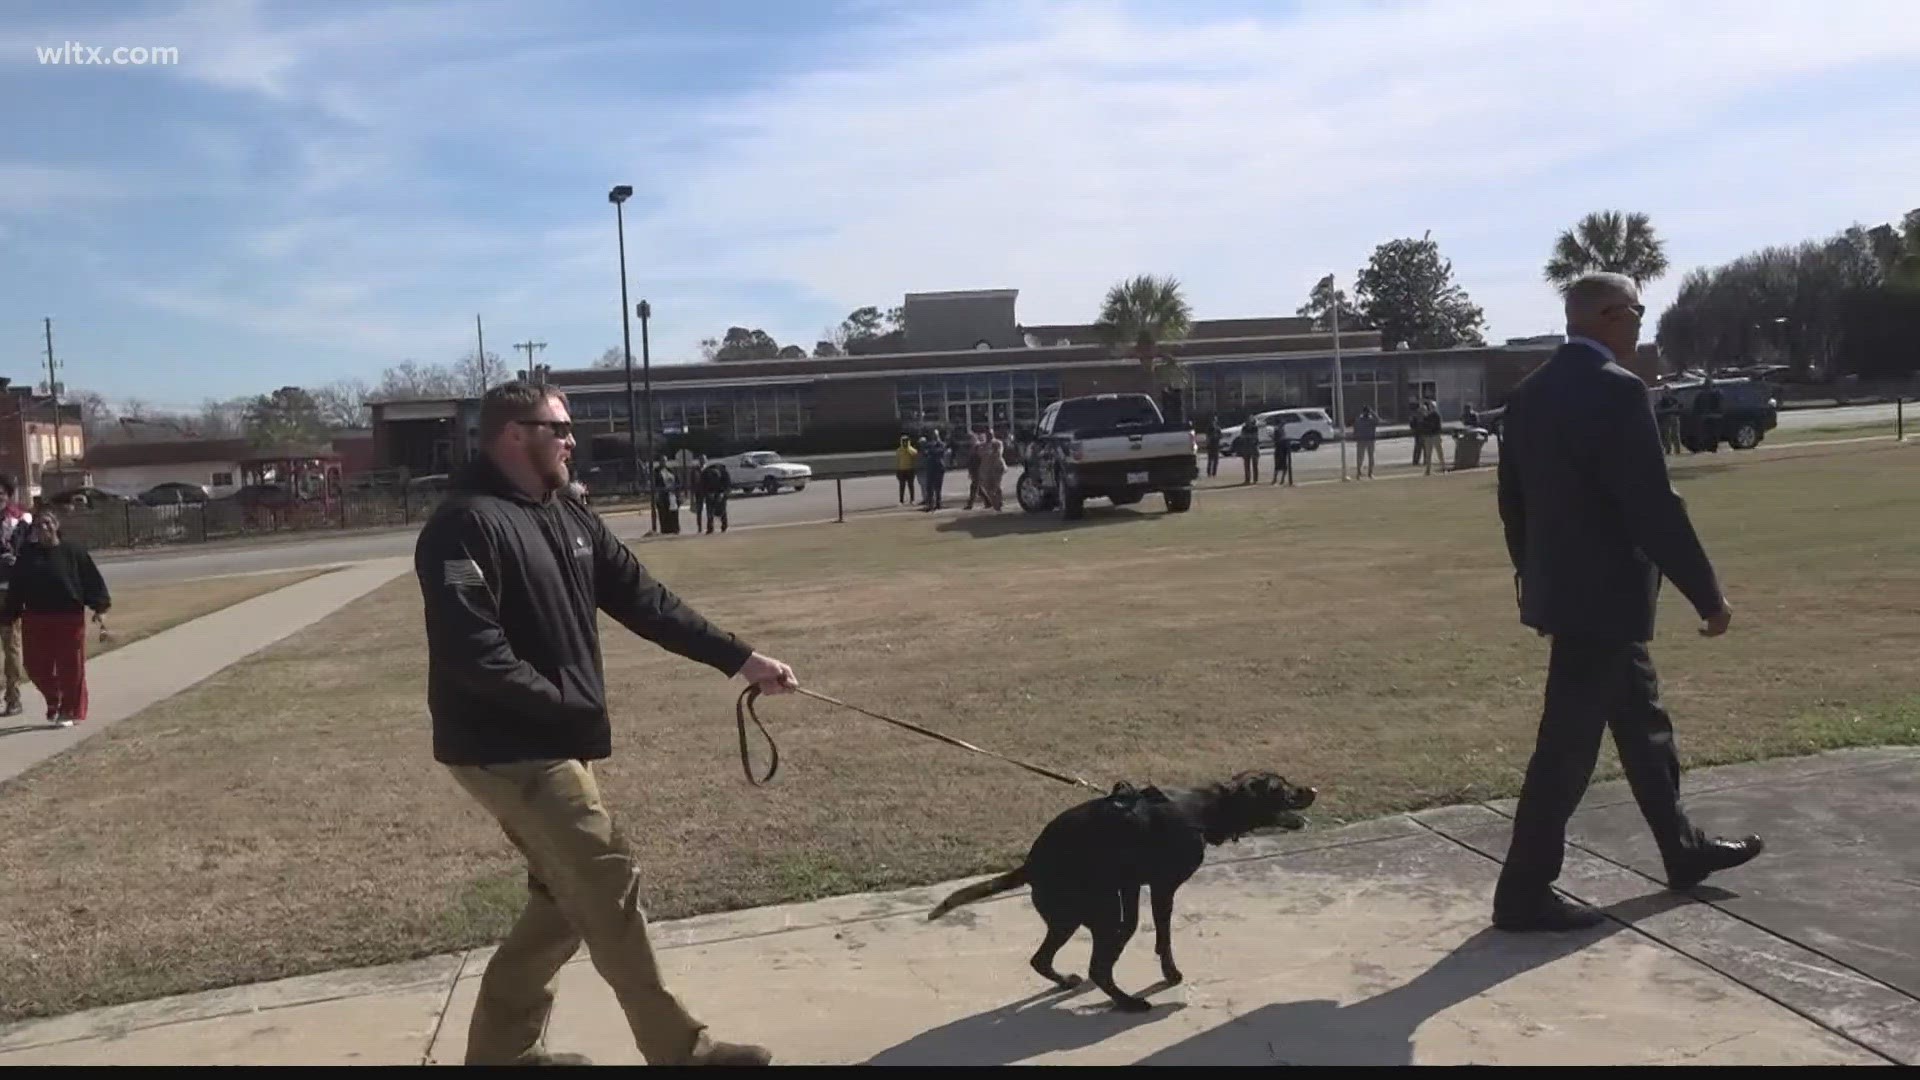 South Carolina State University will soon have a gun sniffing dog on campus, Dakota came today to show what it will look like.